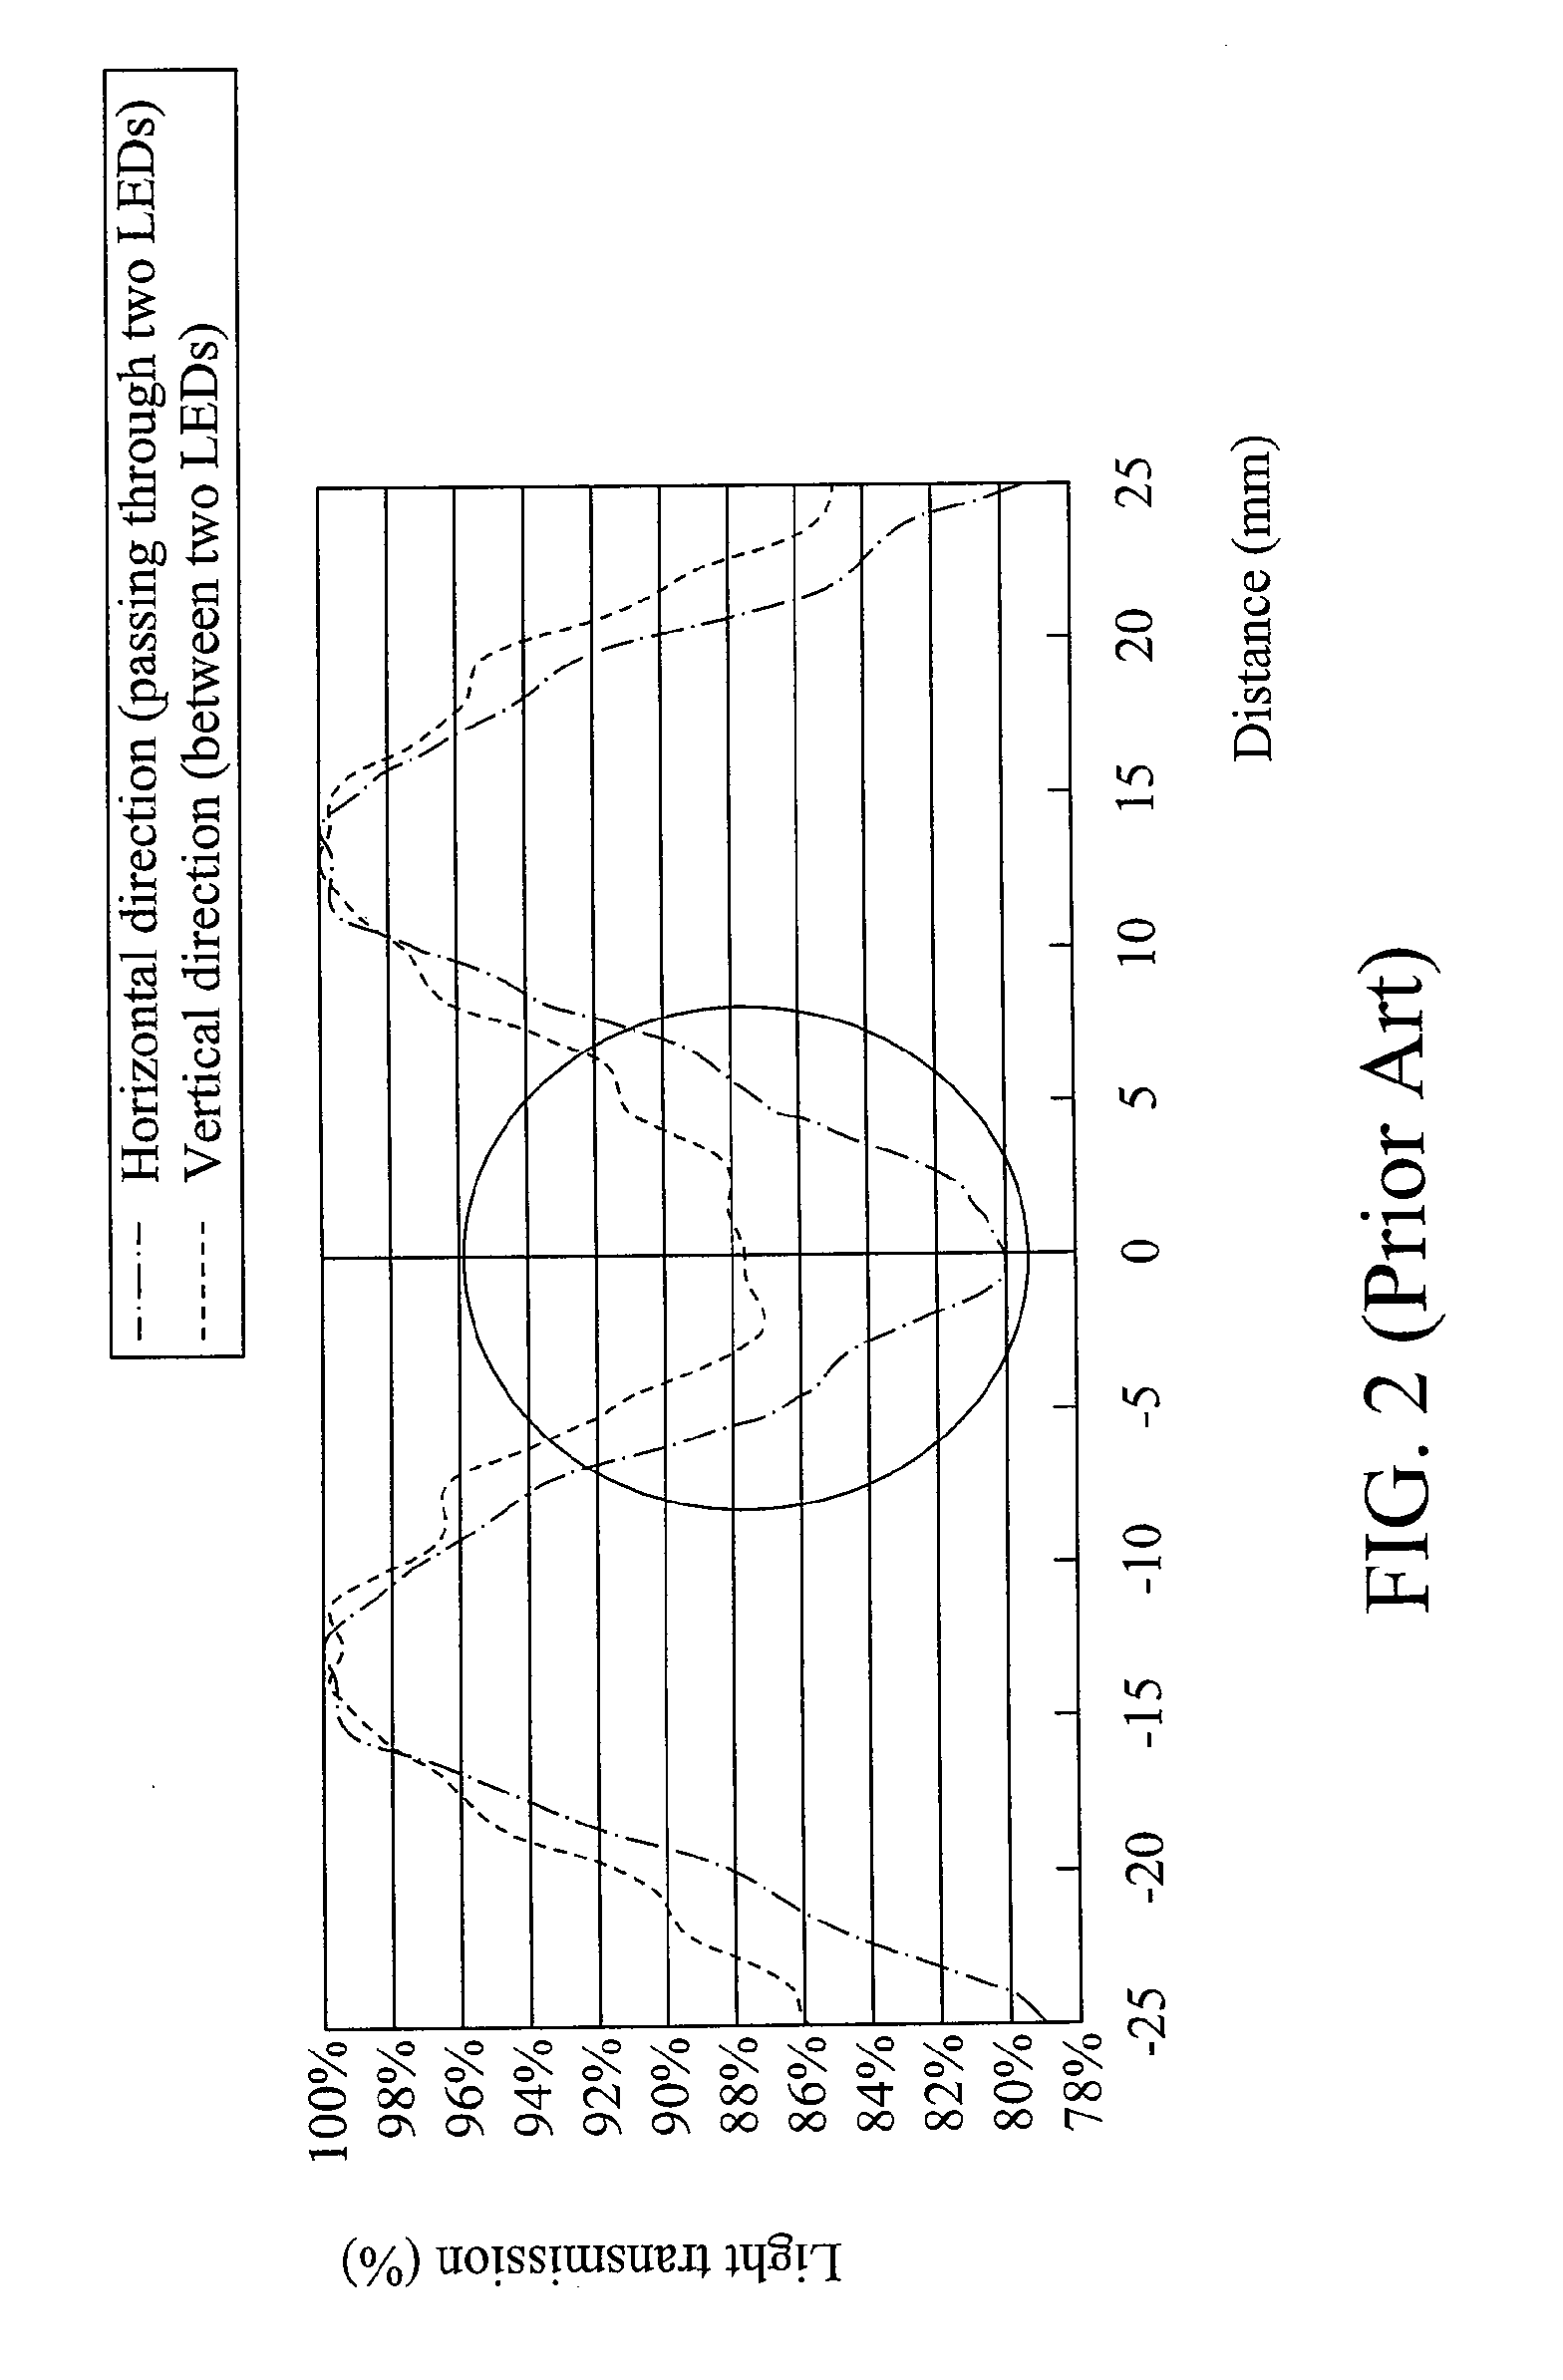 Backlight Module and Scattering Module for Same